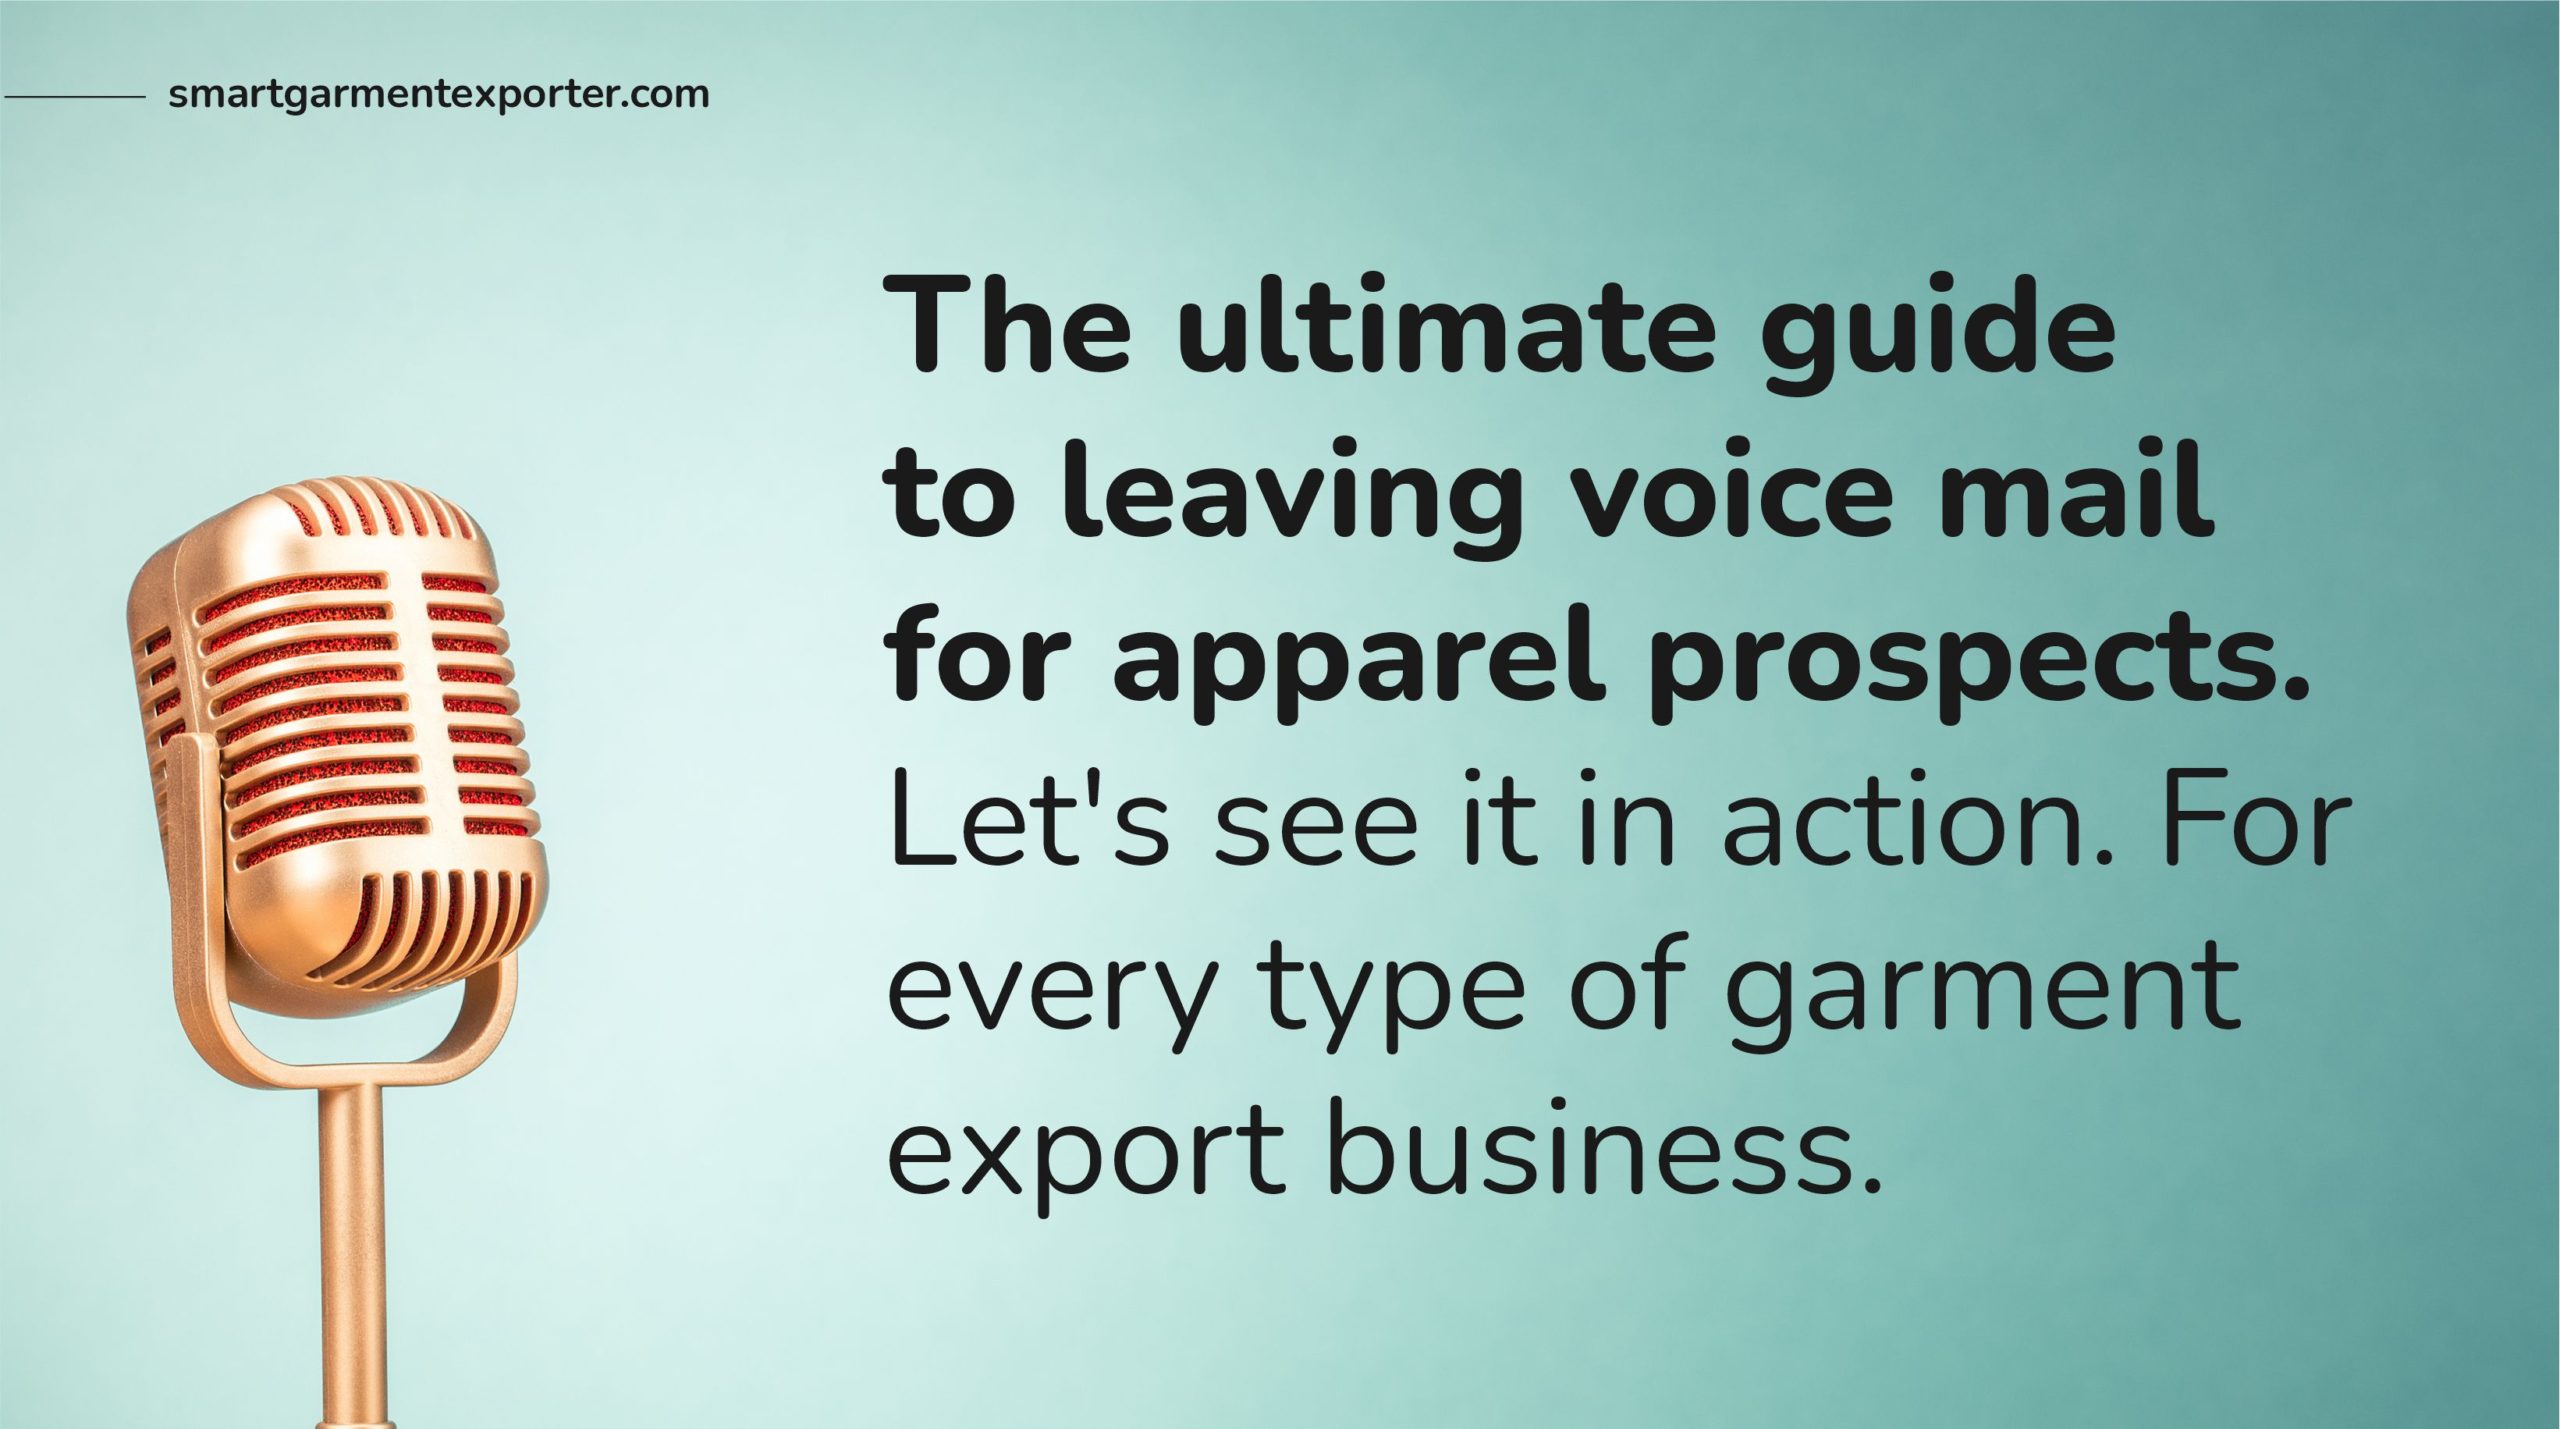 The ultimate guide to leaving voice mail for apparel prospects. Let’s see it in action. For every type of garment export business.